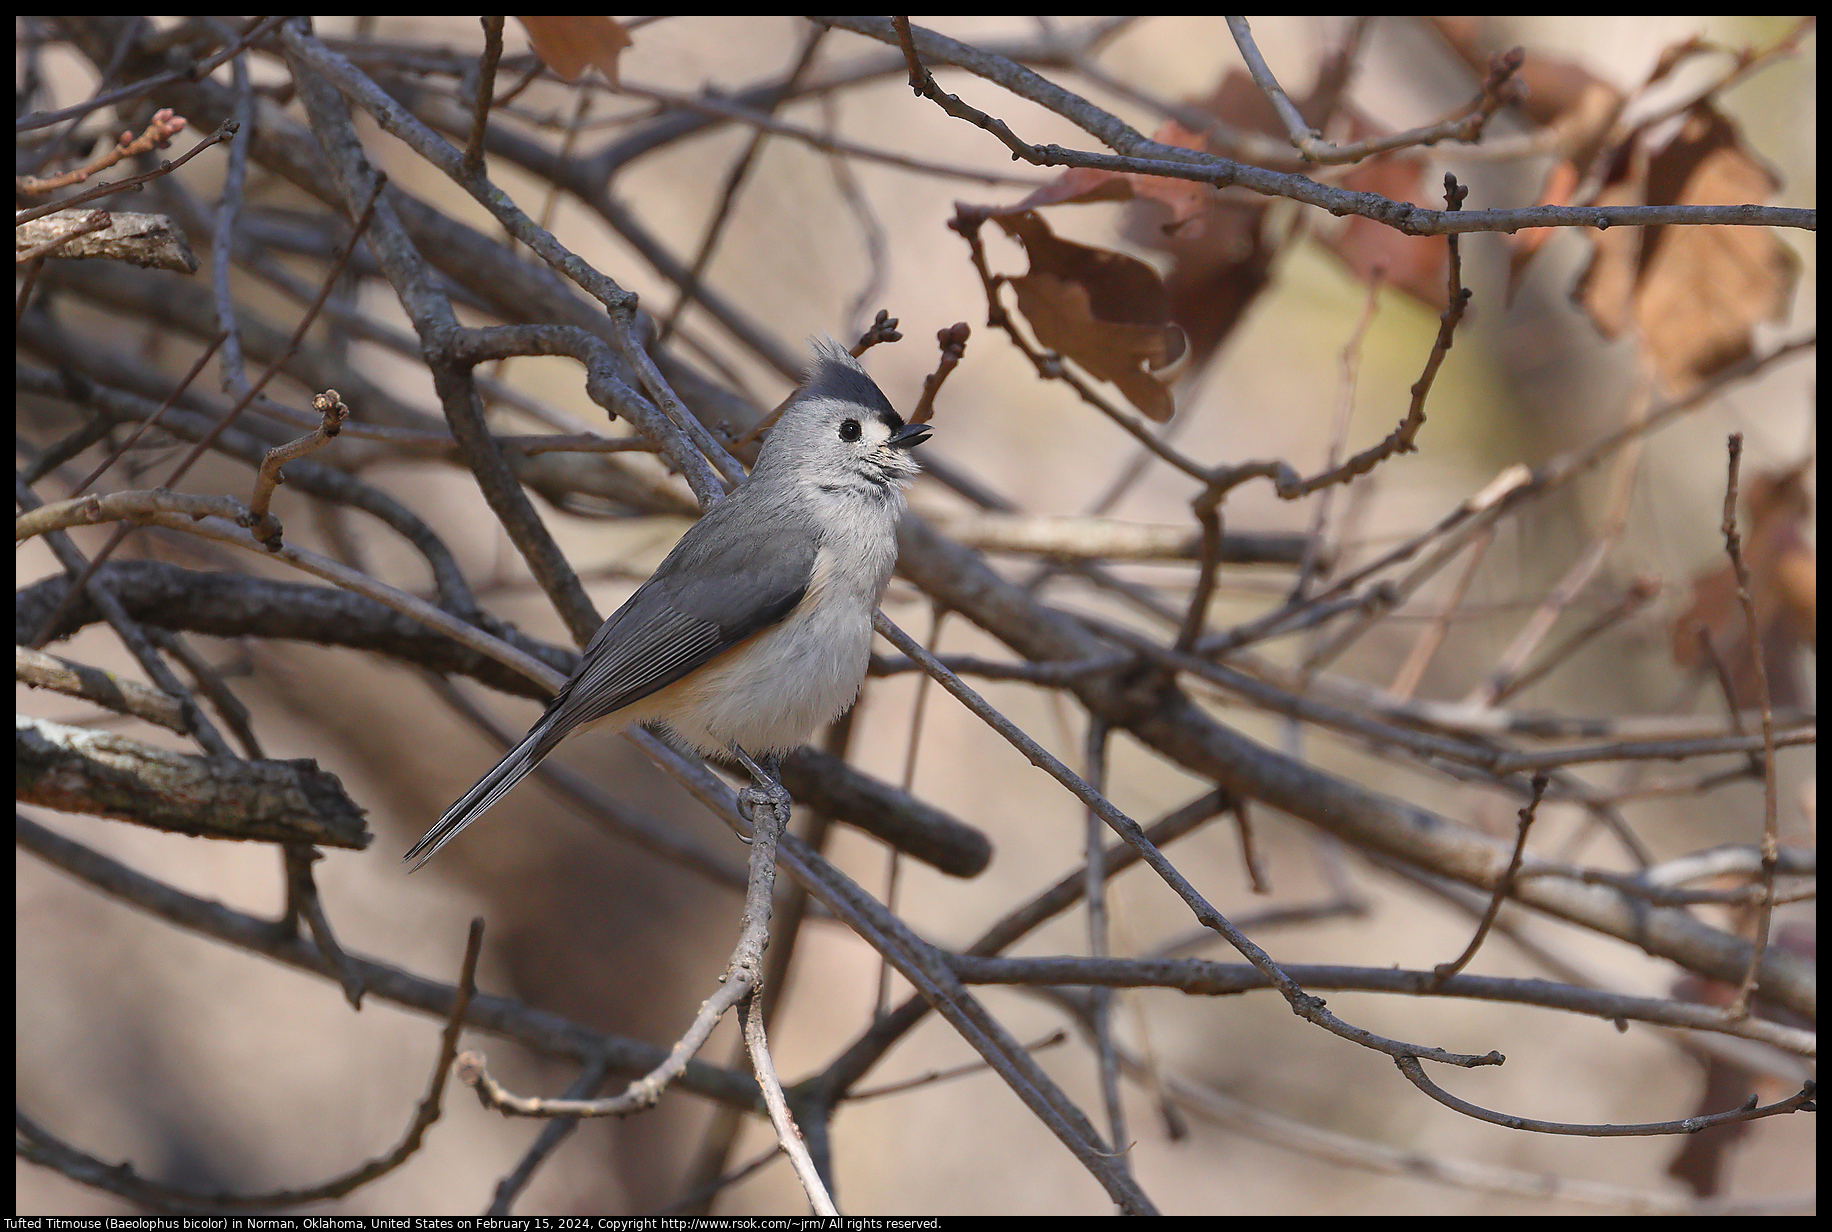 Tufted Titmouse (Baeolophus bicolor) in Norman, Oklahoma, United States on February 15, 2024